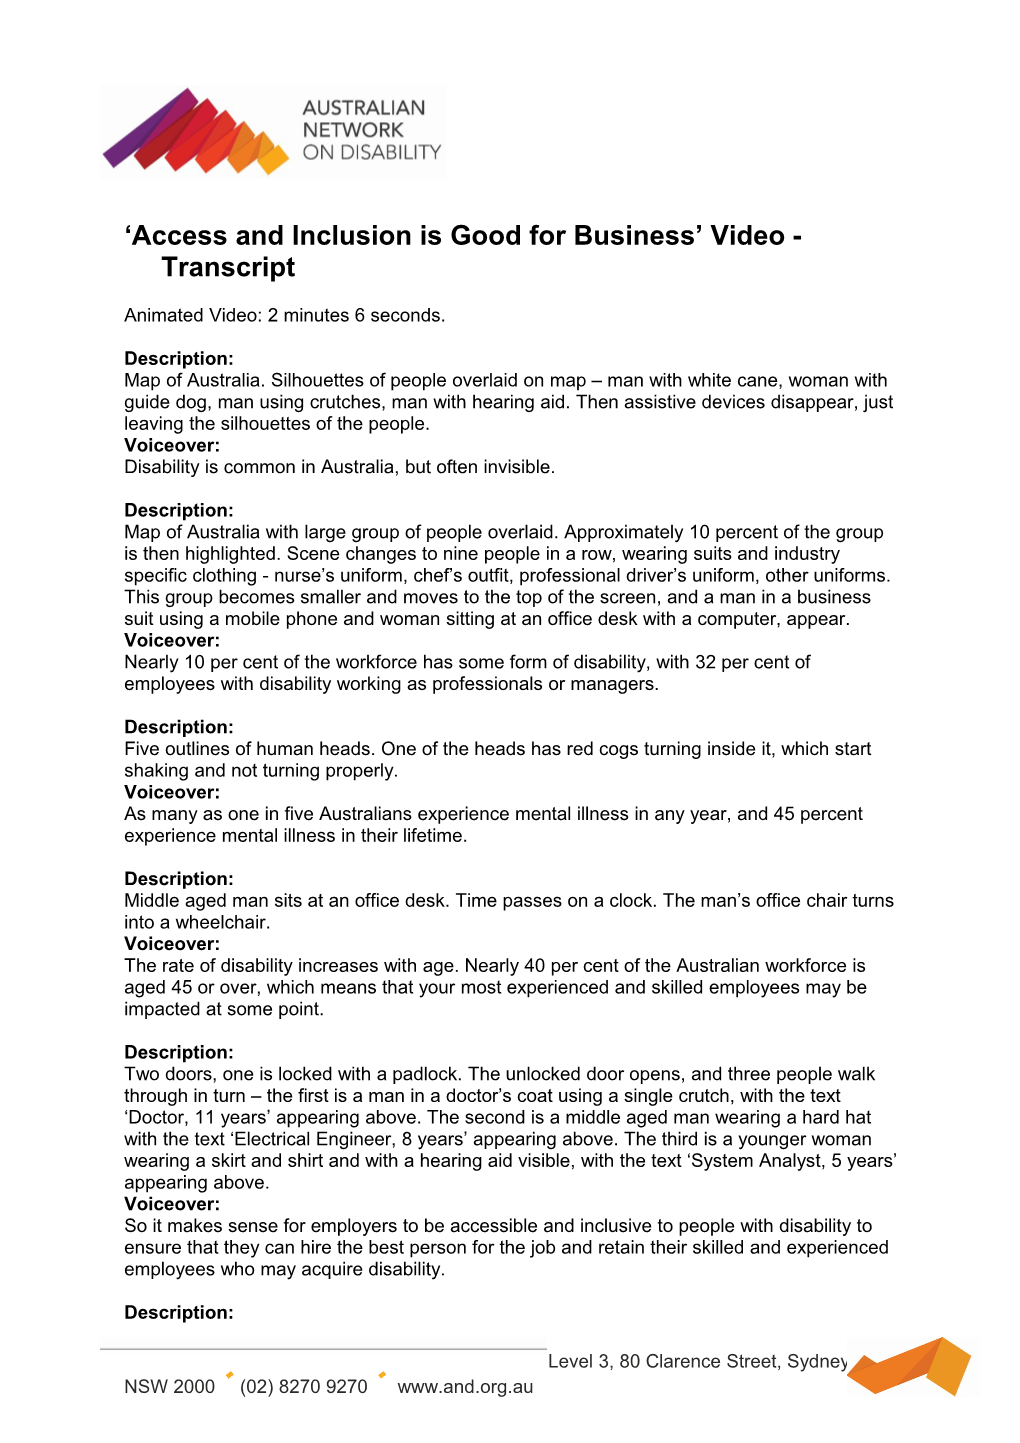 Access and Inclusion Is Good for Business Video - Transcript